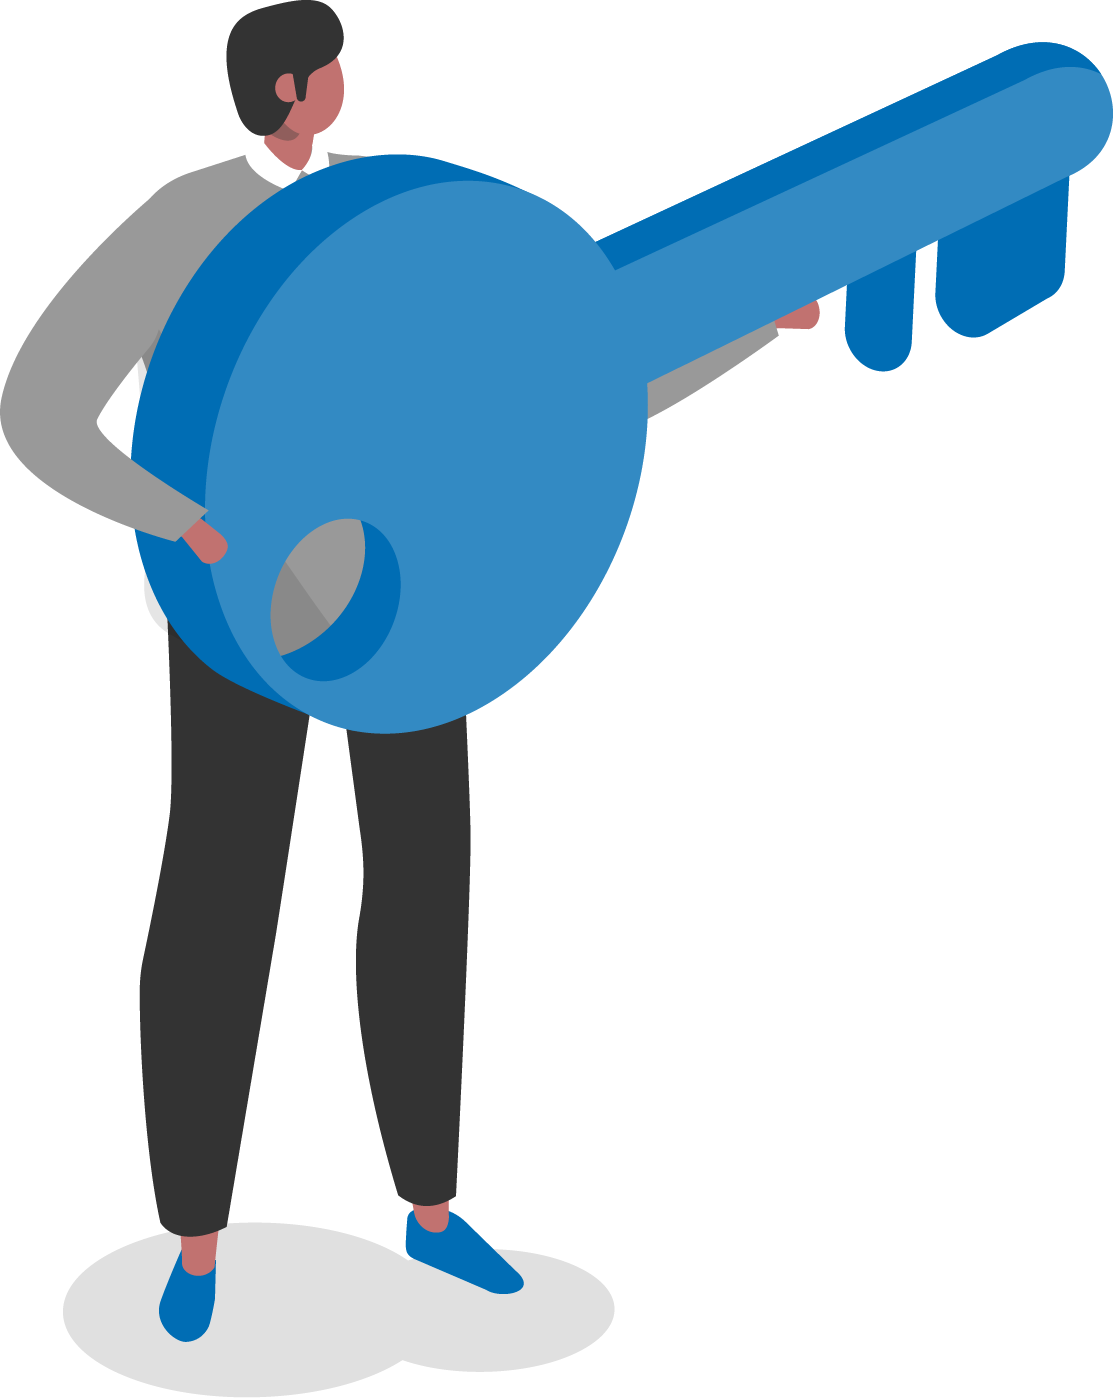 Vector illustration of a man holding a giant blue key.